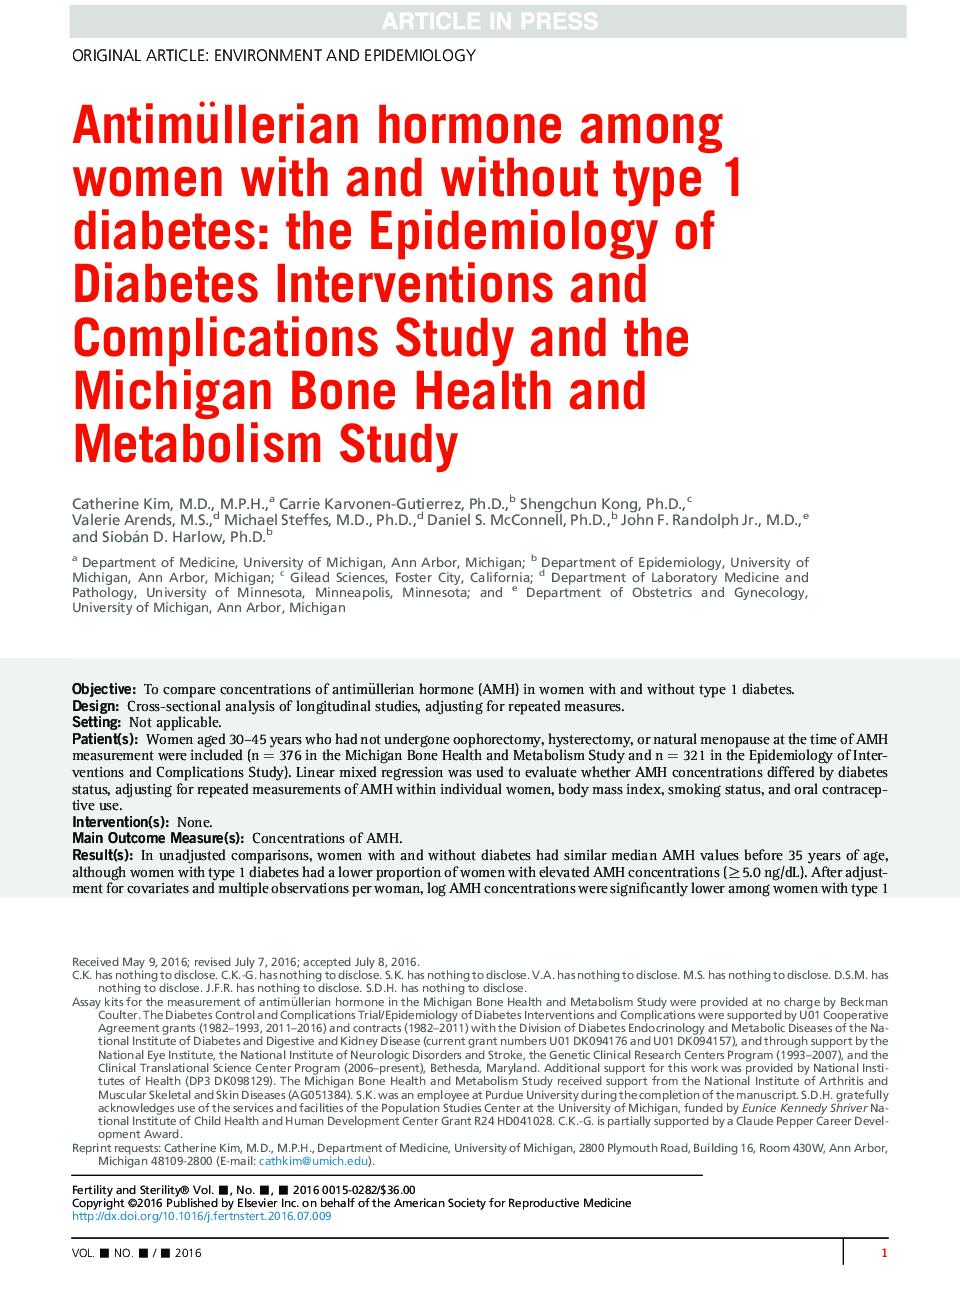 Antimüllerian hormone among women with and without type 1 diabetes: the Epidemiology of Diabetes Interventions and Complications Study and the Michigan Bone Health and Metabolism Study